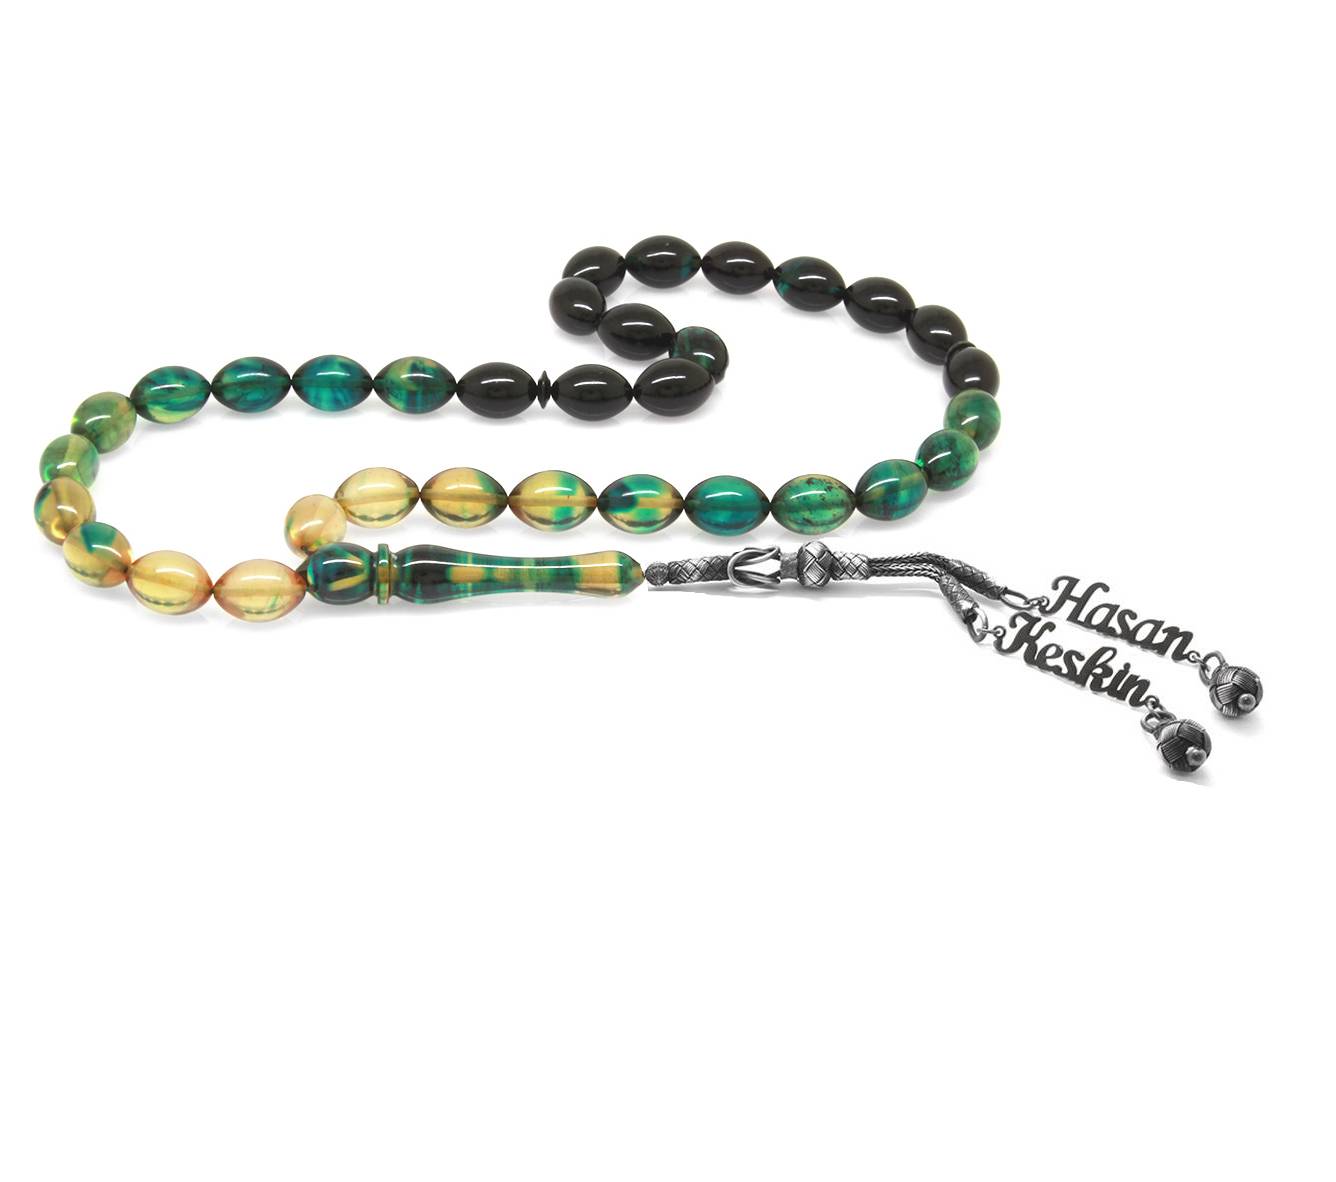 1000 Carat Double Kazaz Tassels Rosary with Name Written